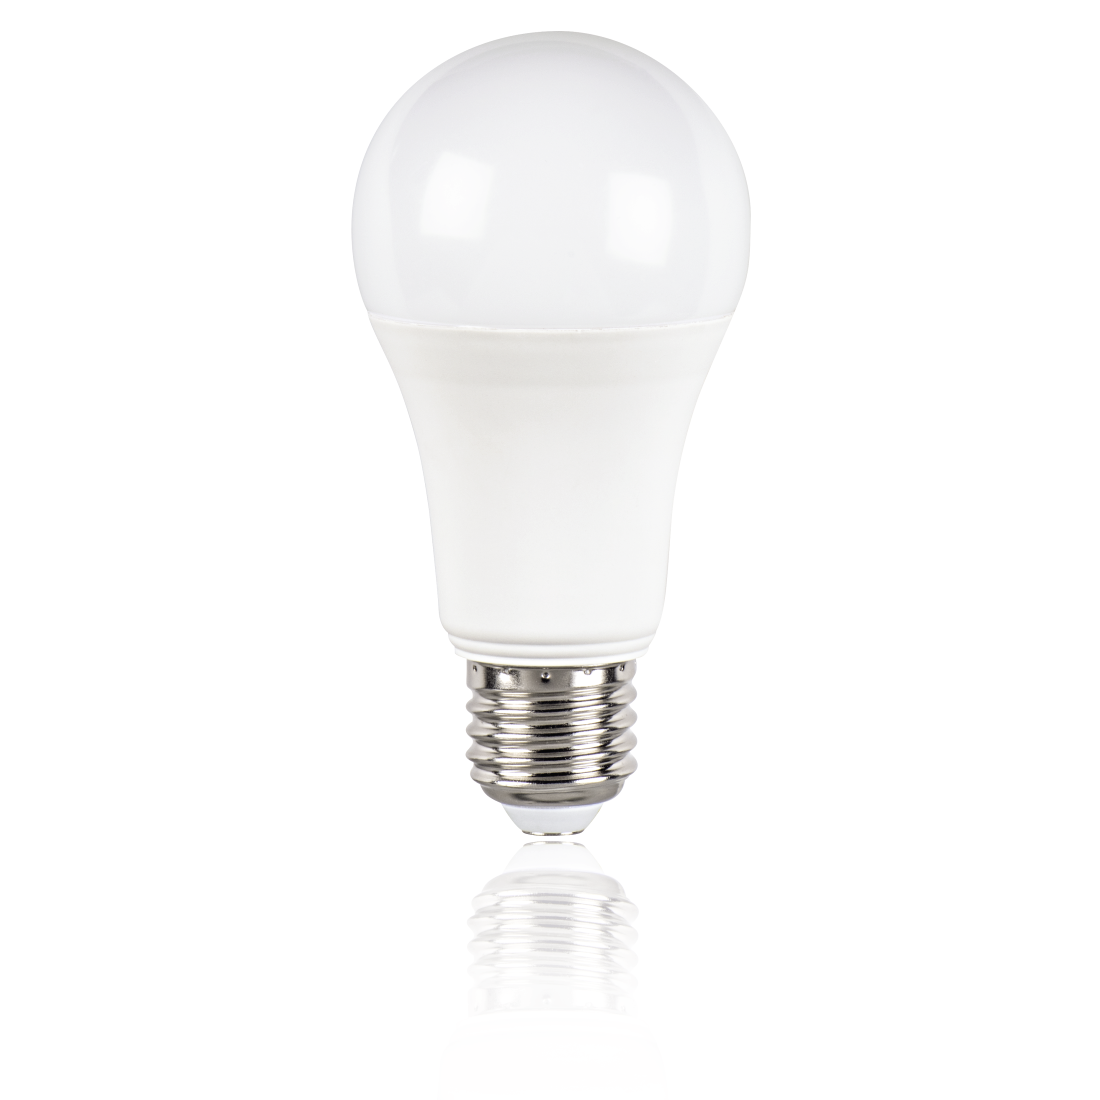 abx2 High-Res Image 2 - Xavax, LED Bulb, E27, 1521lm replaces 100W, incandescent bulb, daylight